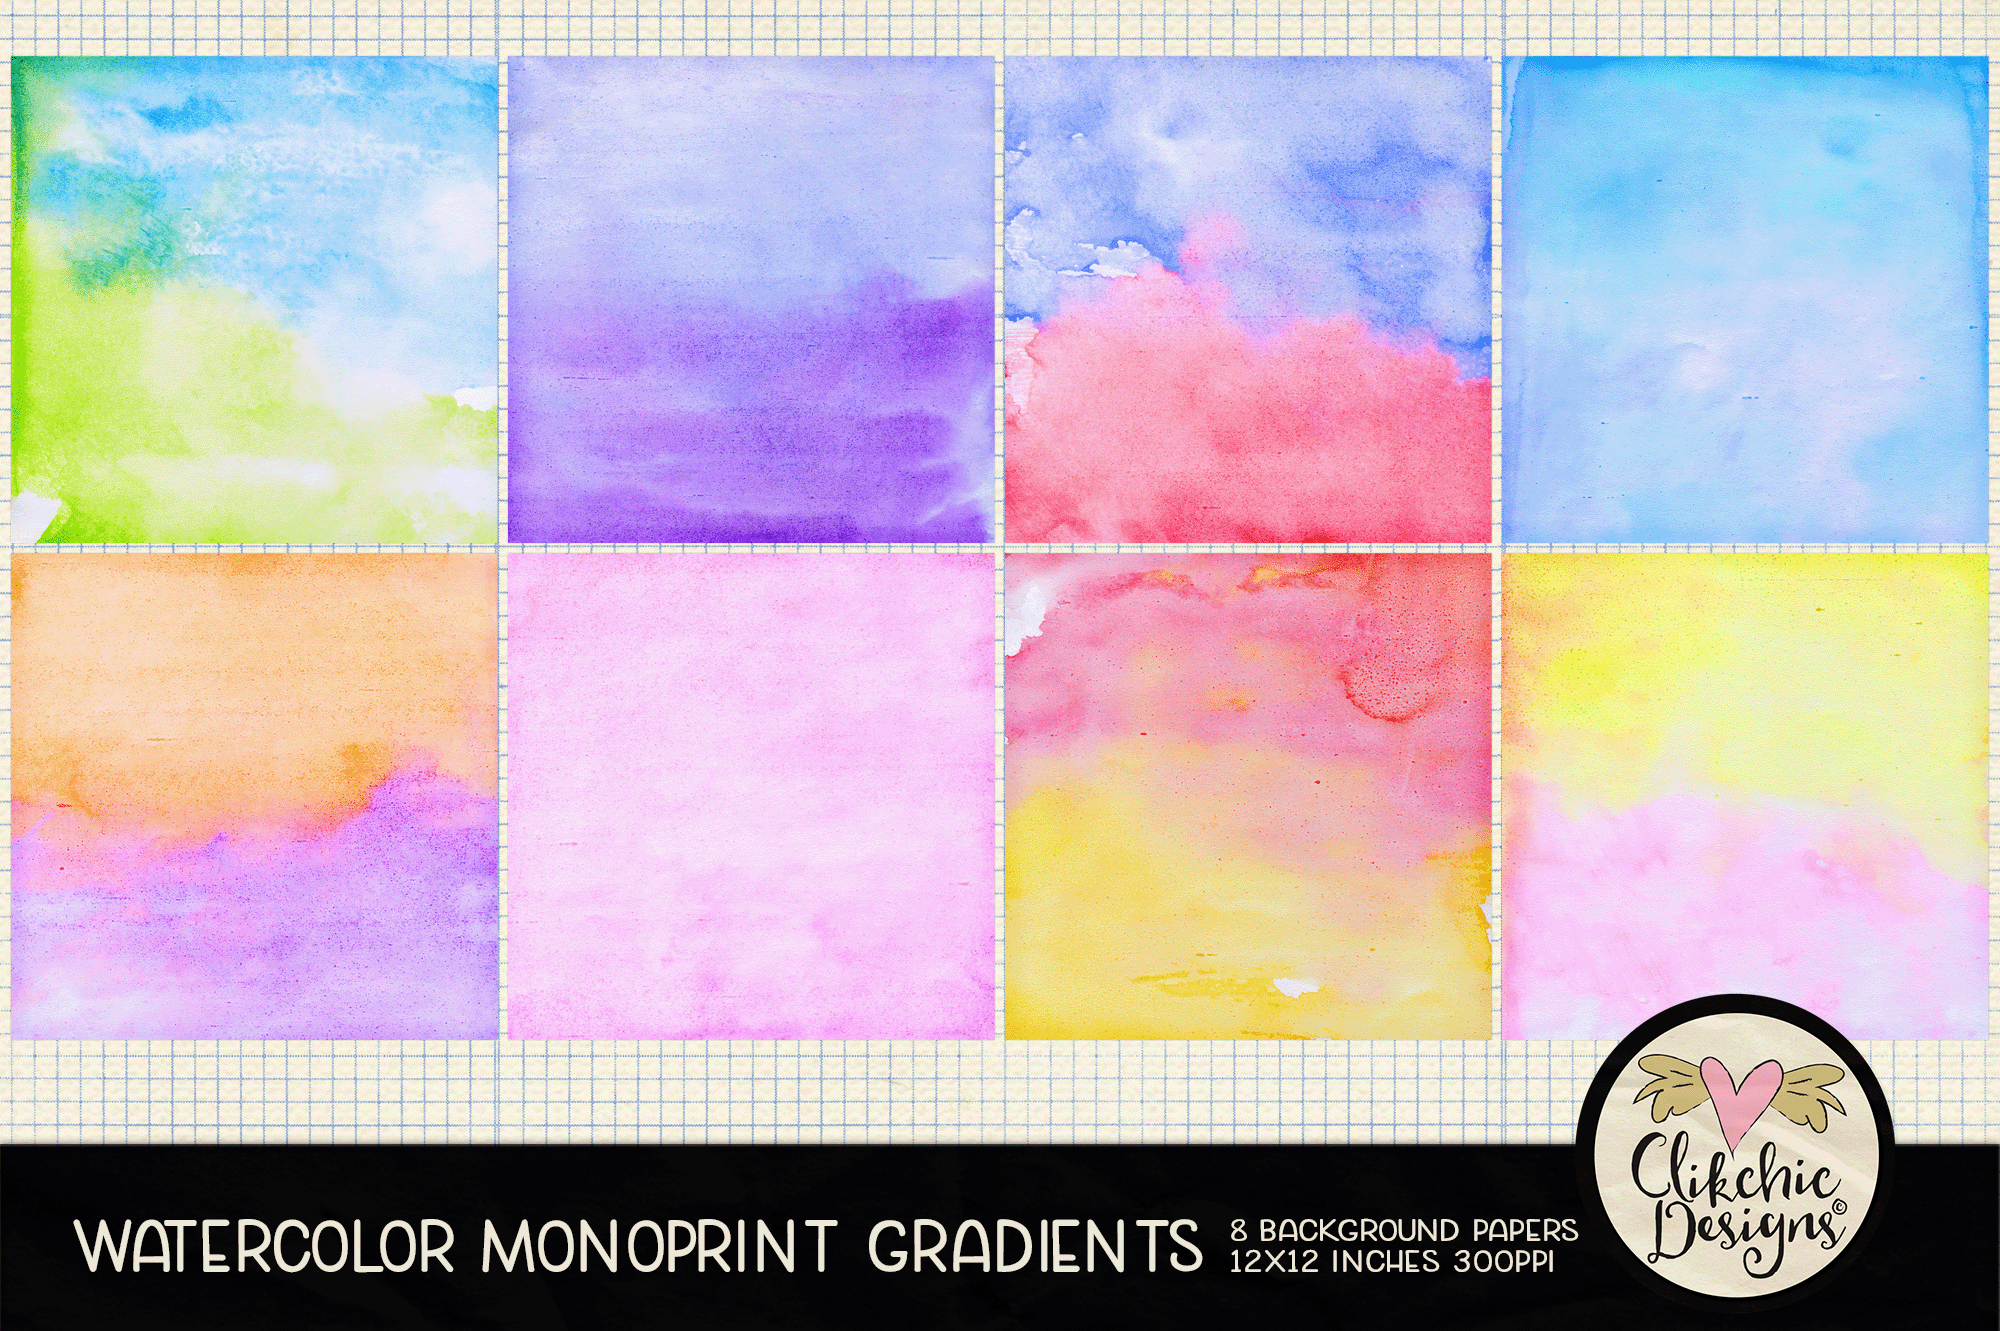 Watercolor Monoprint Gradients Printable Background Papers